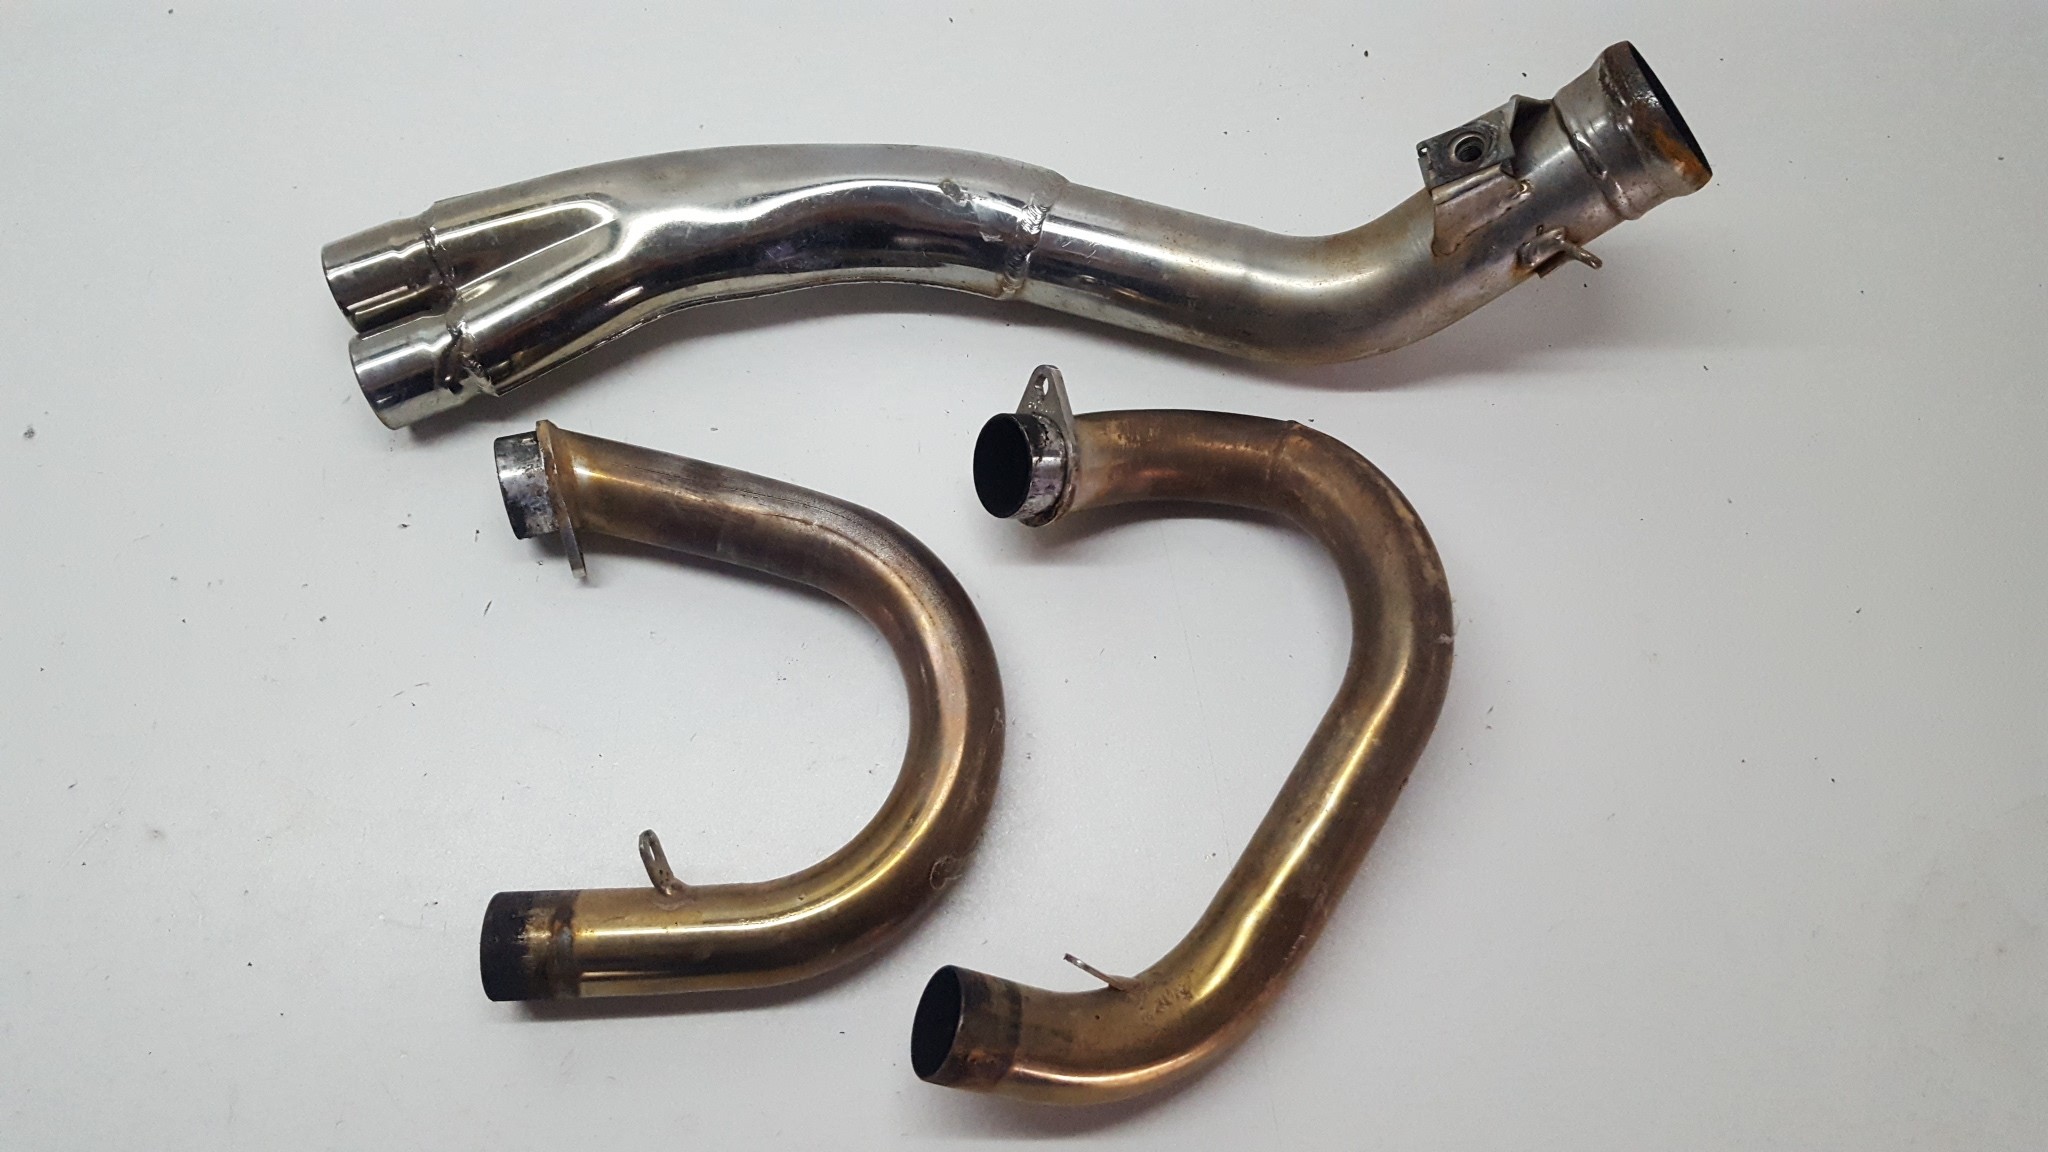 Exhaust Header Collector Pipes Husaberg FE501 2003 FE FC FS 400 501 650 01-03 #739